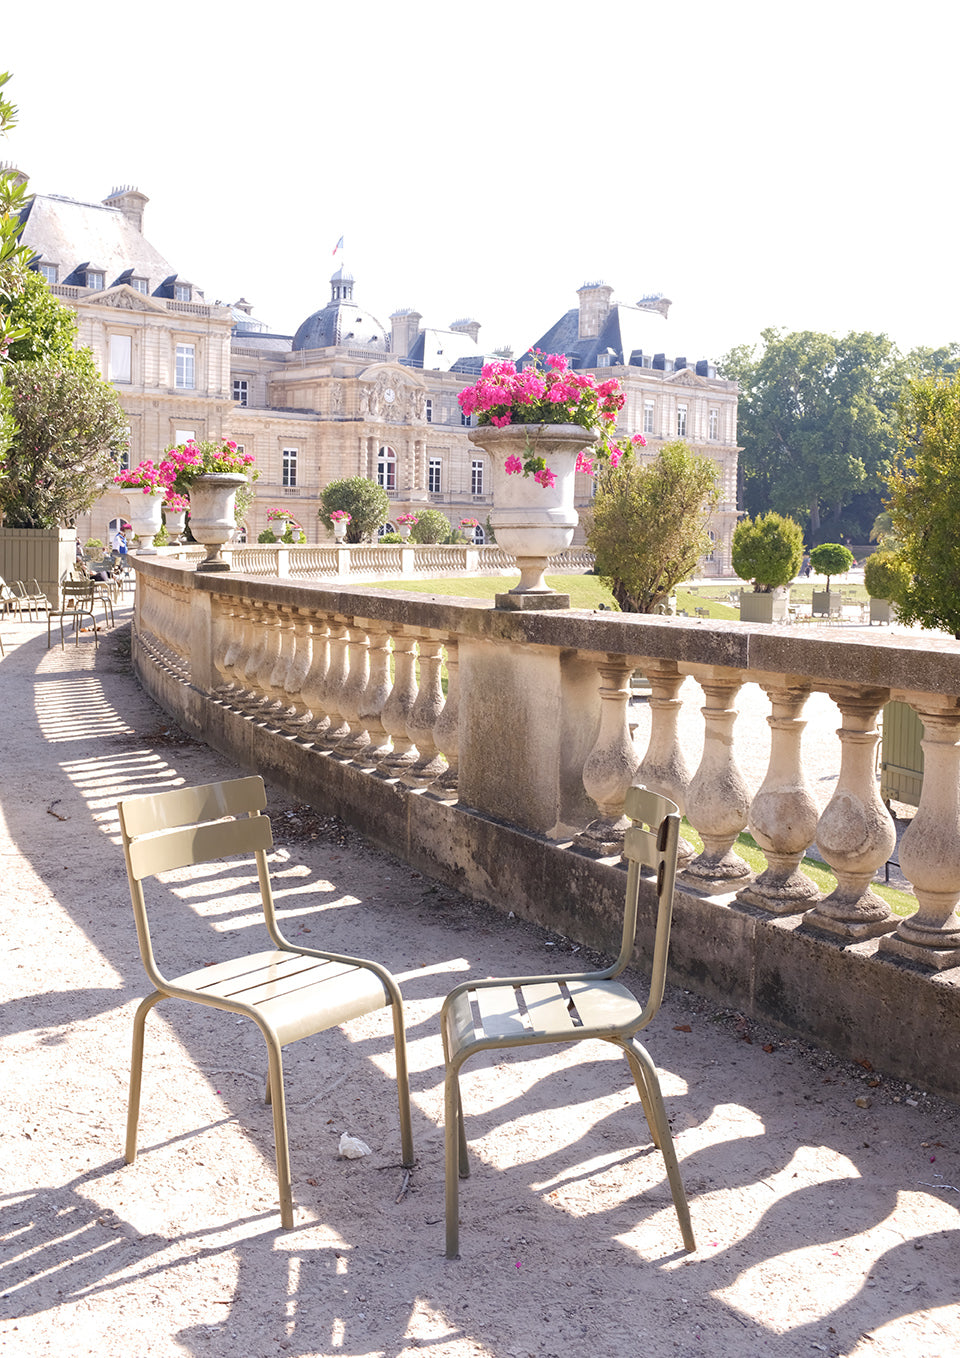 Summer in Luxembourg Gardens - Every Day Paris 